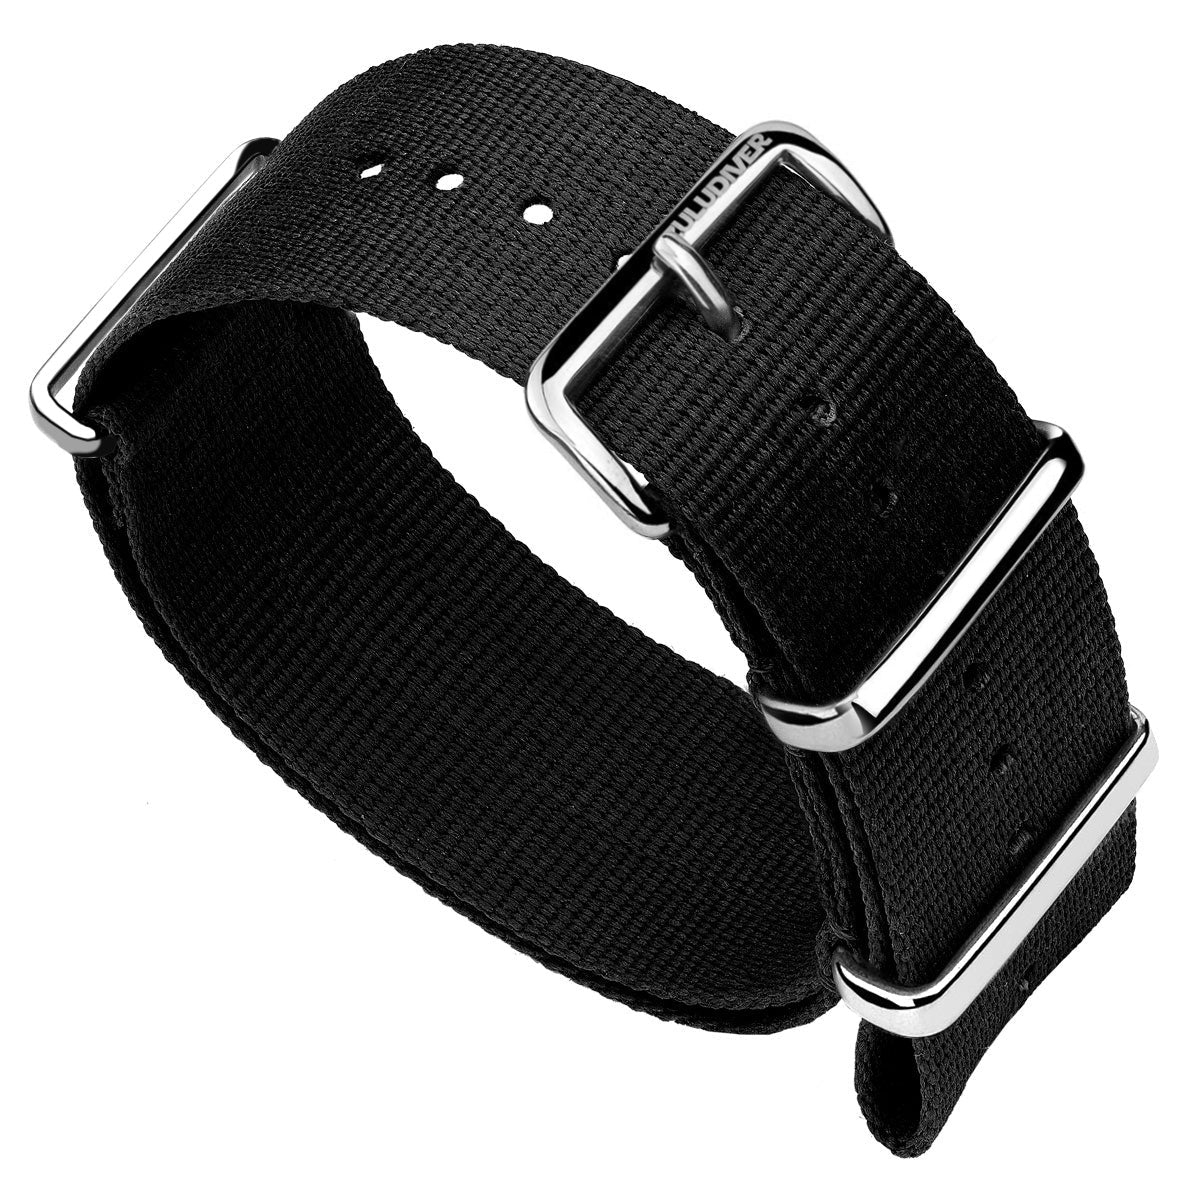 Nylon NATO watch strap, colour black, with stainless steel polished hardware